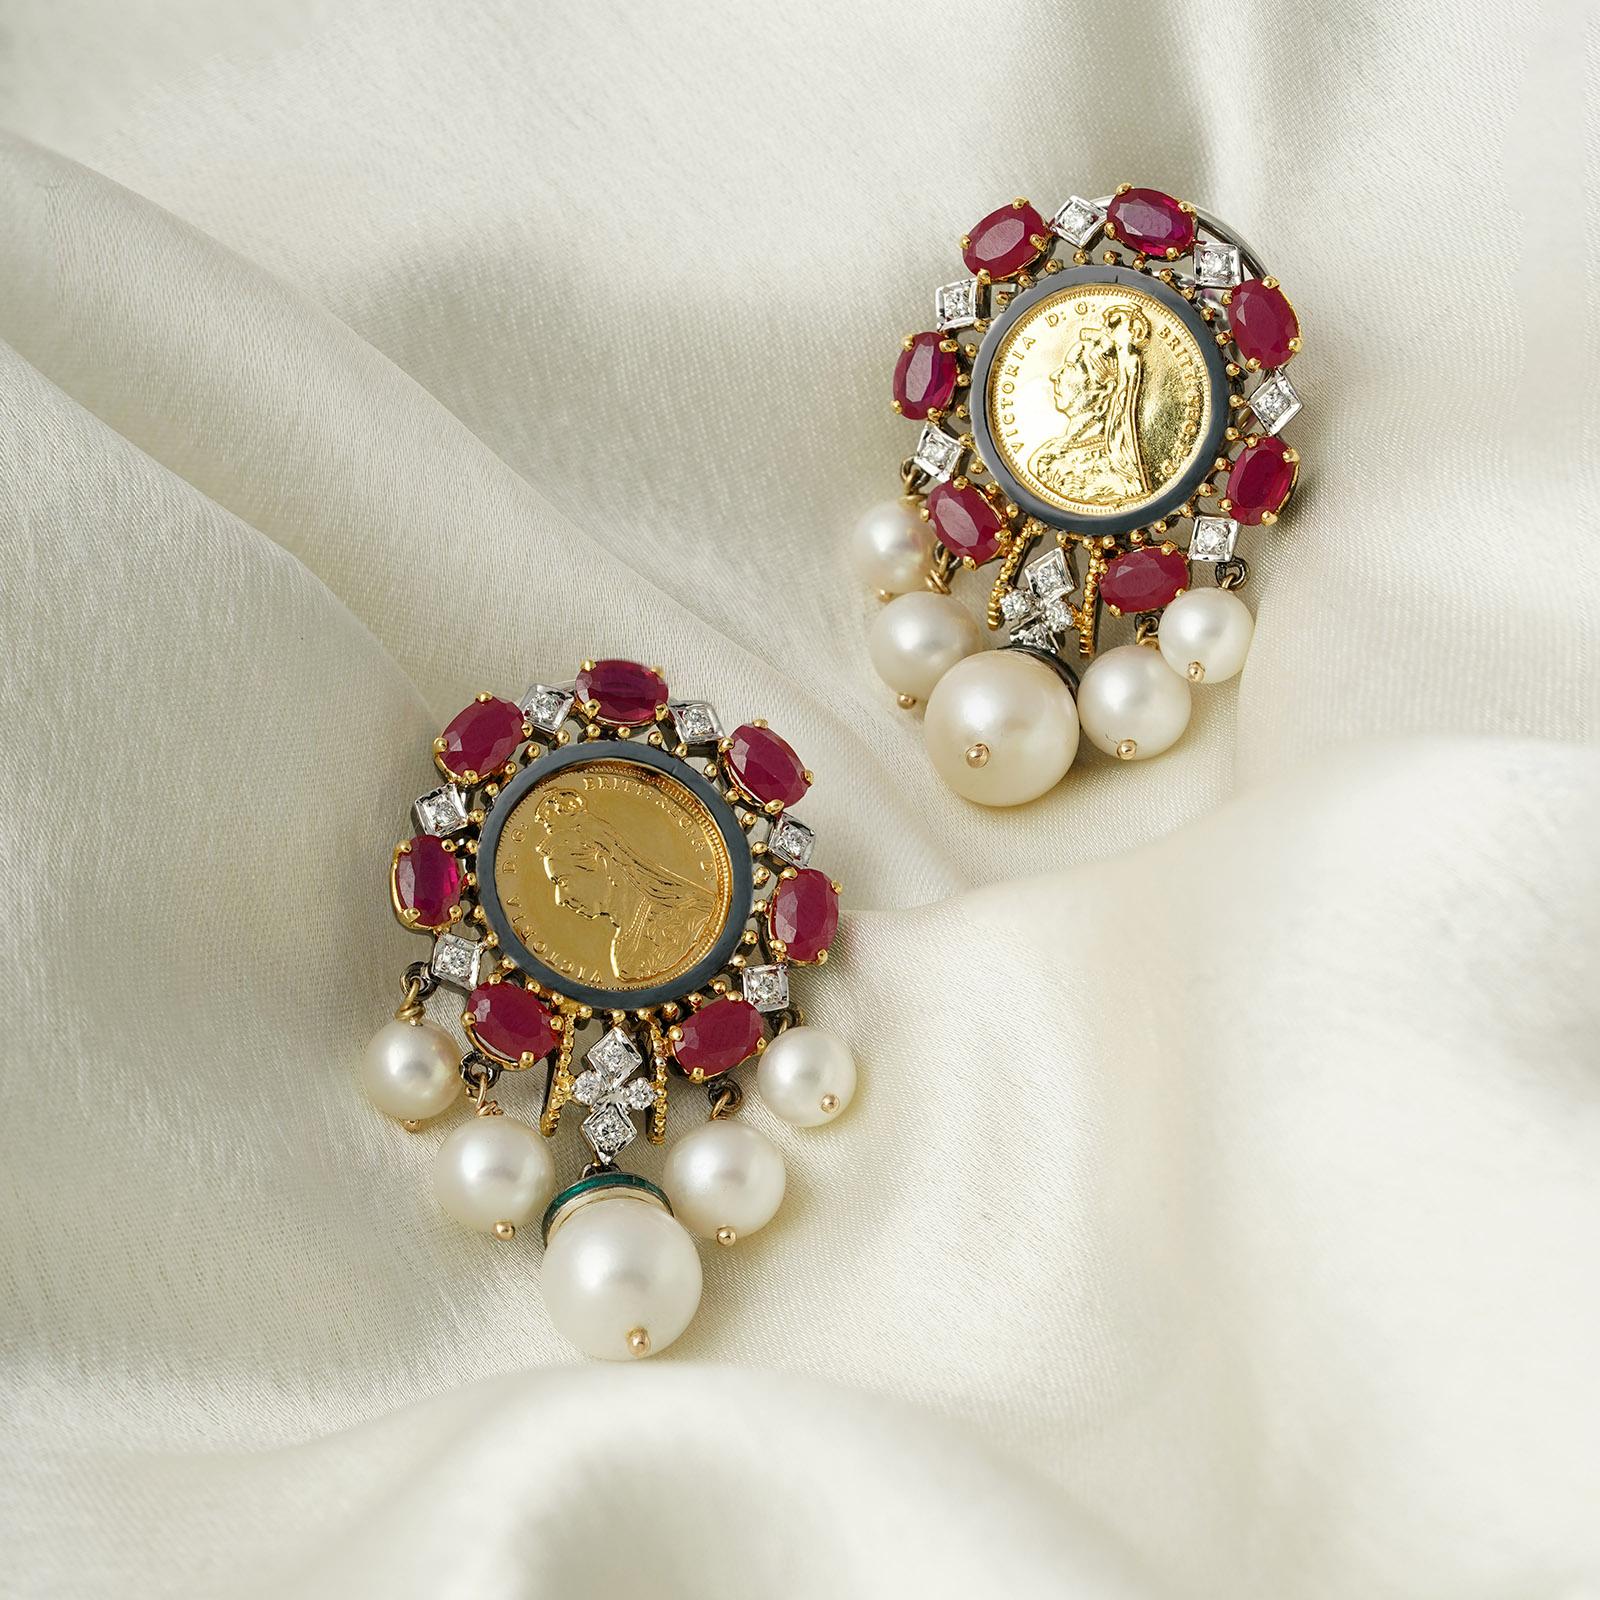 Gold(22K) : 2.20g
Gold(14K) : 6.93g
Brilliant cut Diamonds : (VS clarity & H-I colour) : 0.40ct
Gemstone : Ruby, Chinese Button Pearls
Silver Alloy

Our design ideology aims to celebrate Indian craft with a layer of sophistication and minimalism.